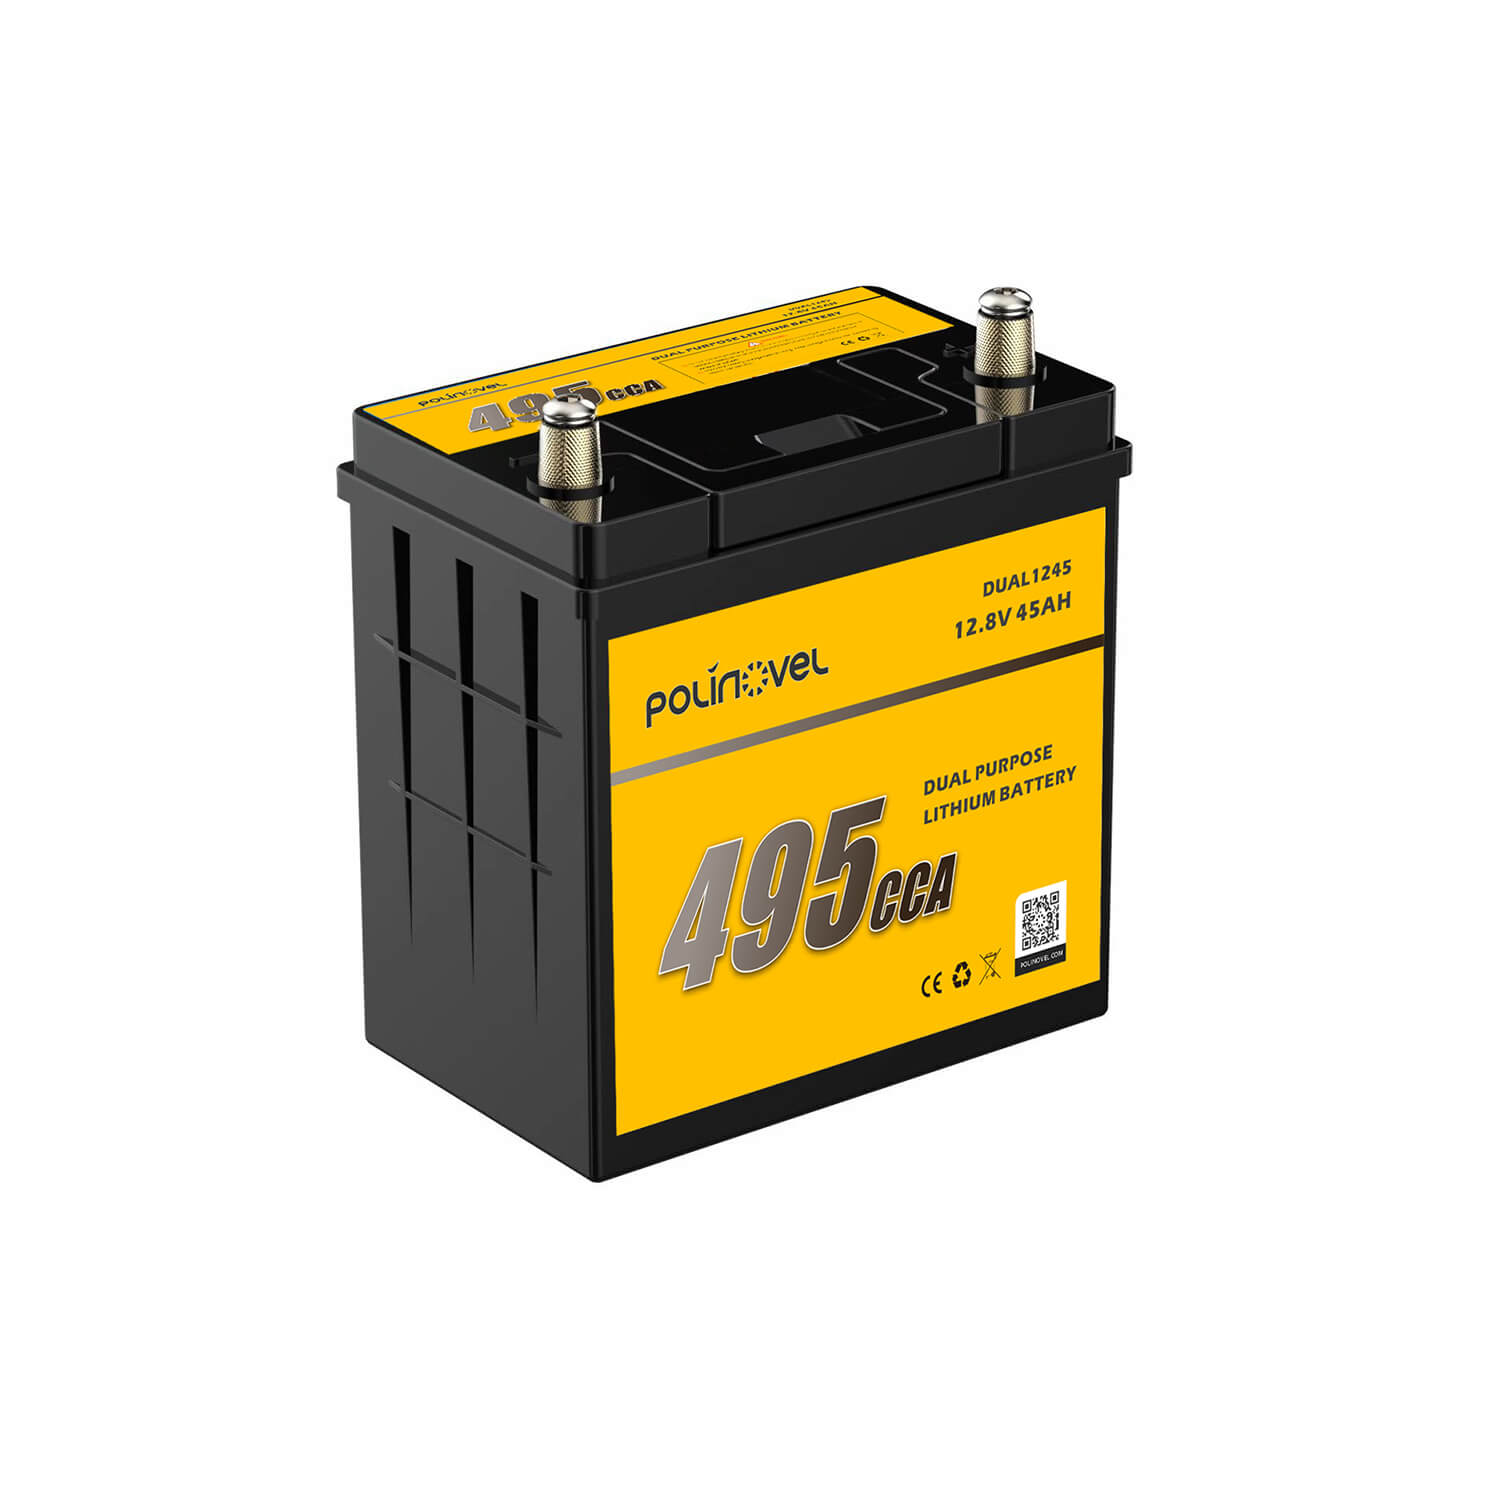 Dual Purpose 495CCA Lithium Deep Cycle Starting Battery